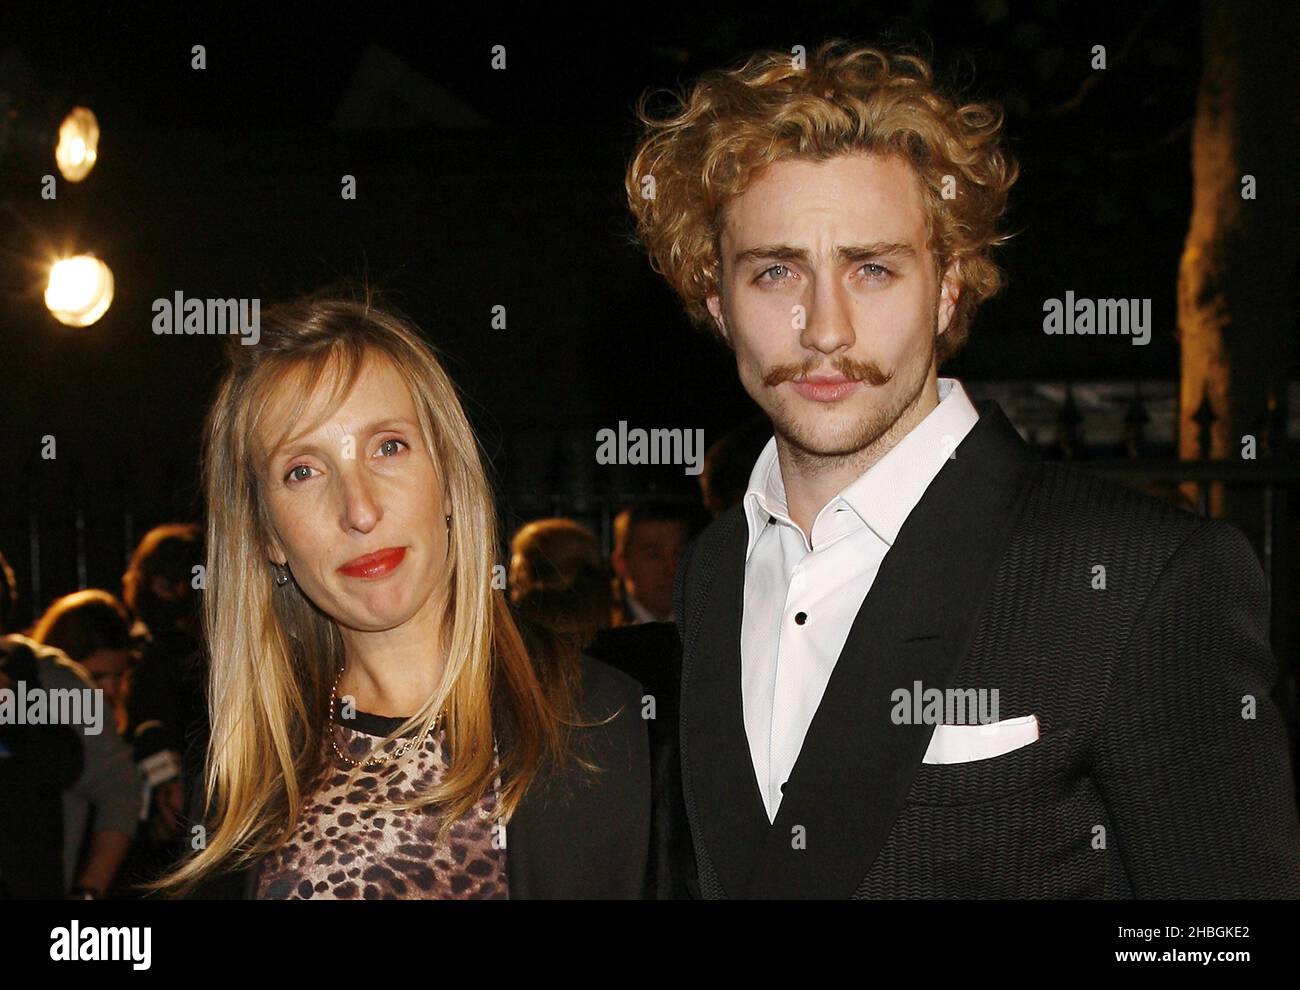 Sam Taylor Wood and Aaron Johnson arriving at the 55th BFI Film Festival Awards at LSO Church in East London. Stock Photo